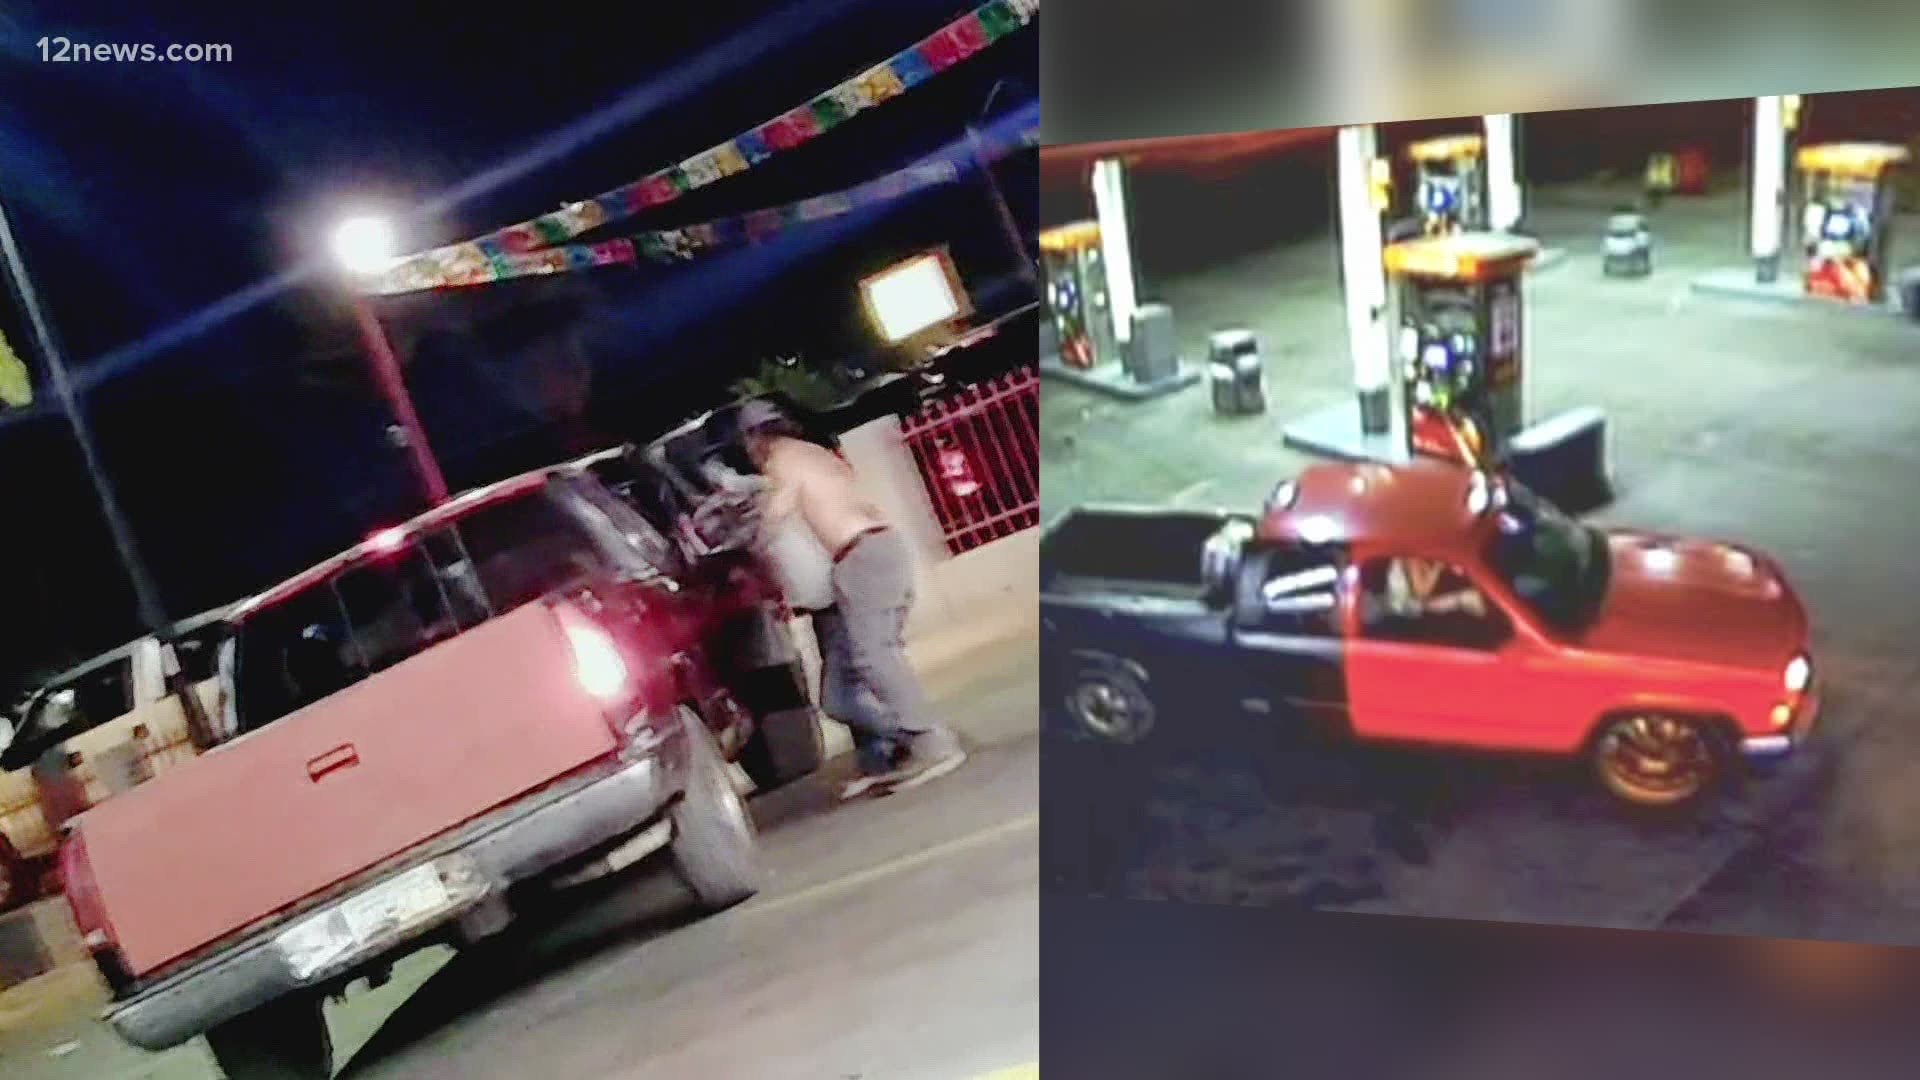 Police are asking for tips after a video of a woman possibly being kidnapped in Phoenix was reported. Video shows a shirtless man forcing a woman into a red truck.